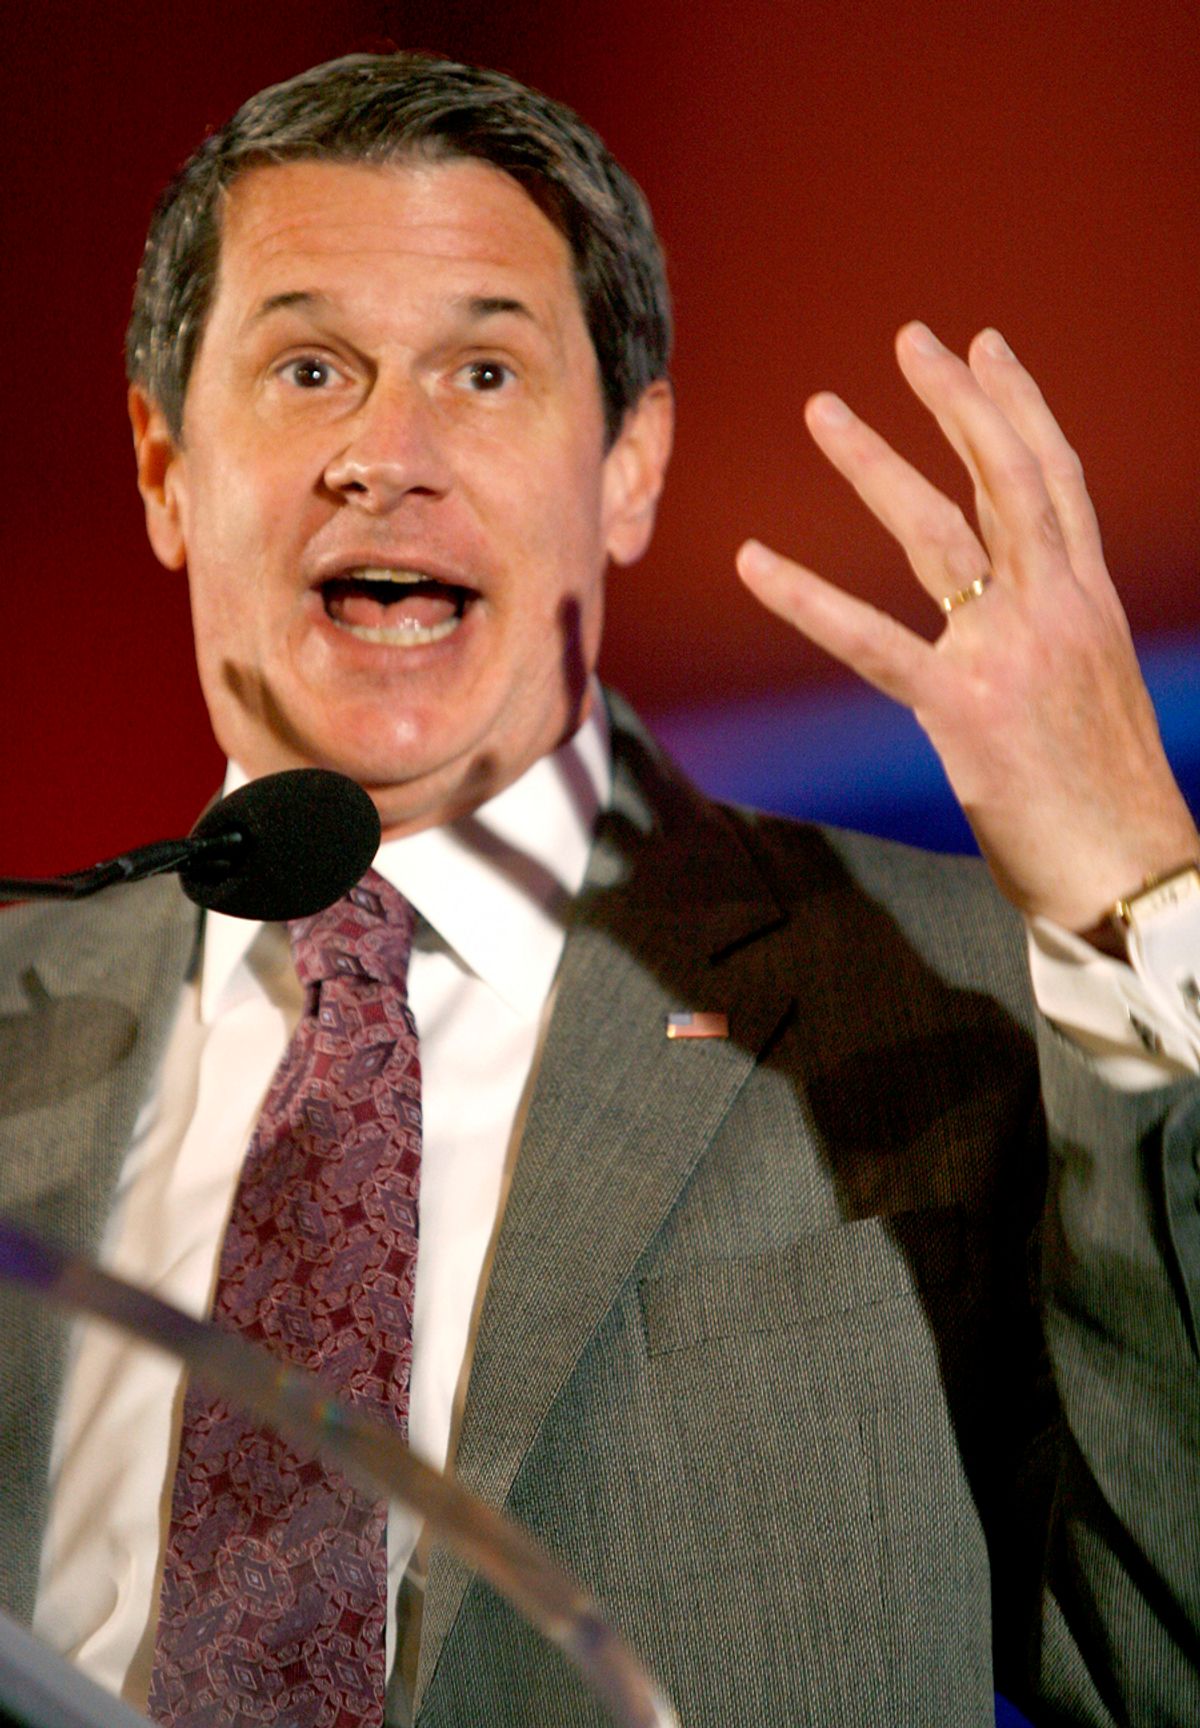 U.S. Representative David Vitter of Louisiana speaks at the 2010 Southern Republican Leadership Conference in New Orleans, Louisiana April 10, 2010. As many as 3,000 party activists are to attend the four-day conference, the most prominent gathering of Republicans outside of their presidential nominating conventions. REUTERS/Sean Gardner (UNITED STATES - Tags: POLITICS)  (Â© Sean Gardner / Reuters)